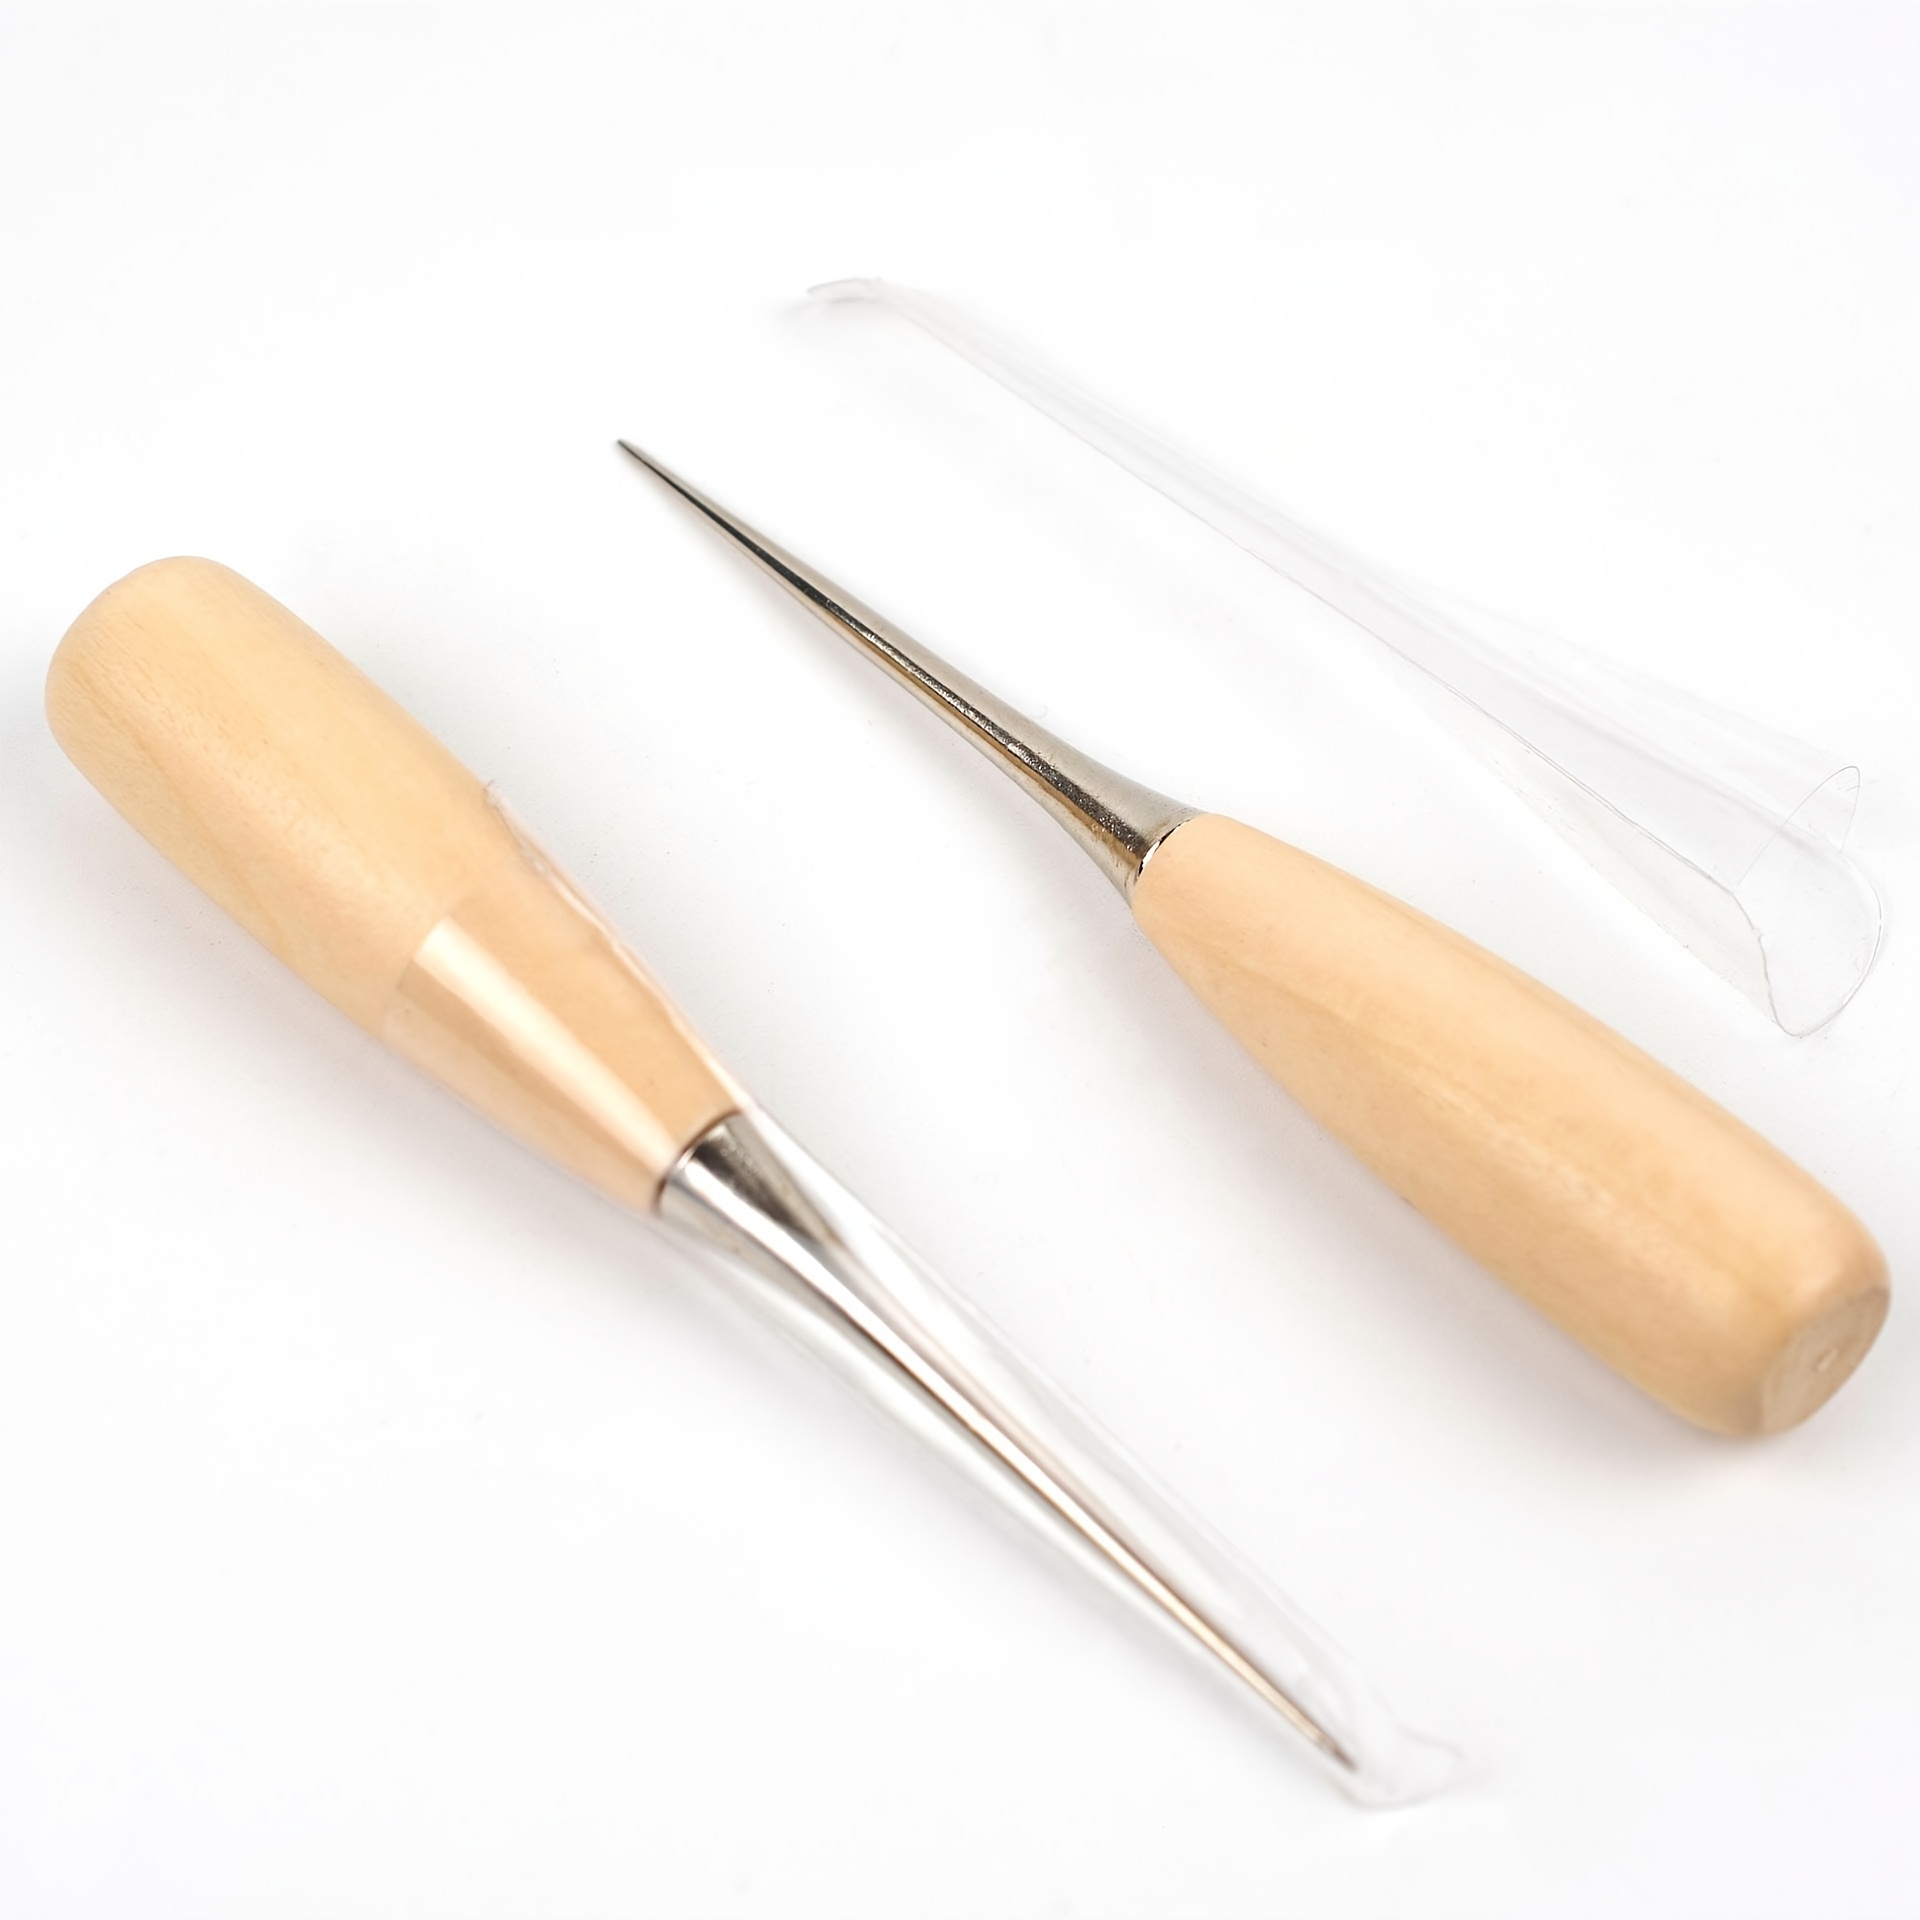 WOODEN HANDLE Hole Maker Punching AWL Tool